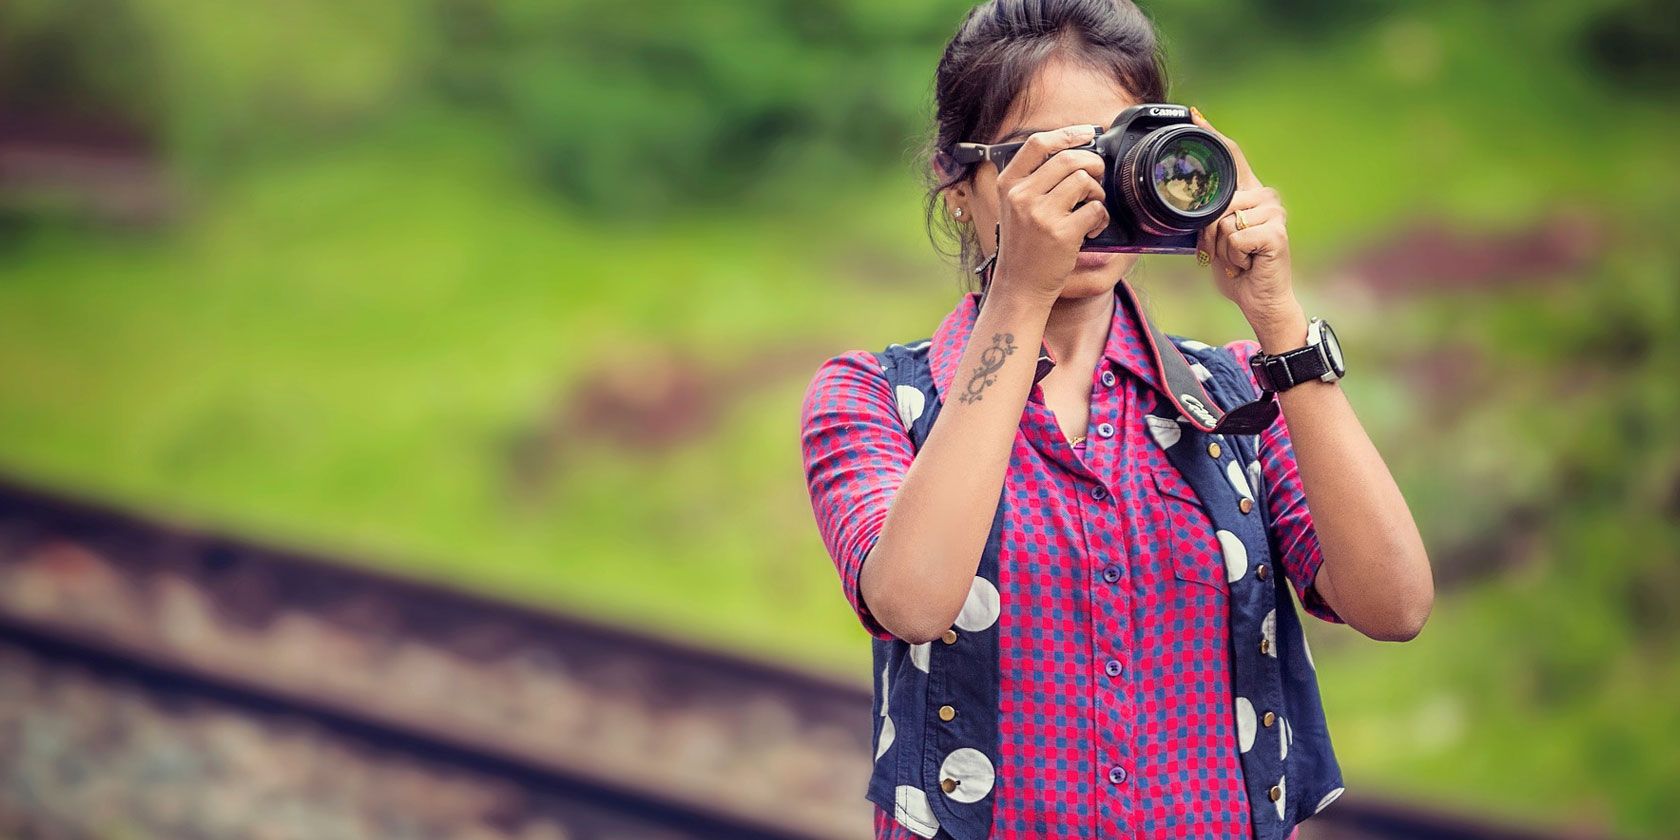 Camera Pose Stock Photos and Images - 123RF